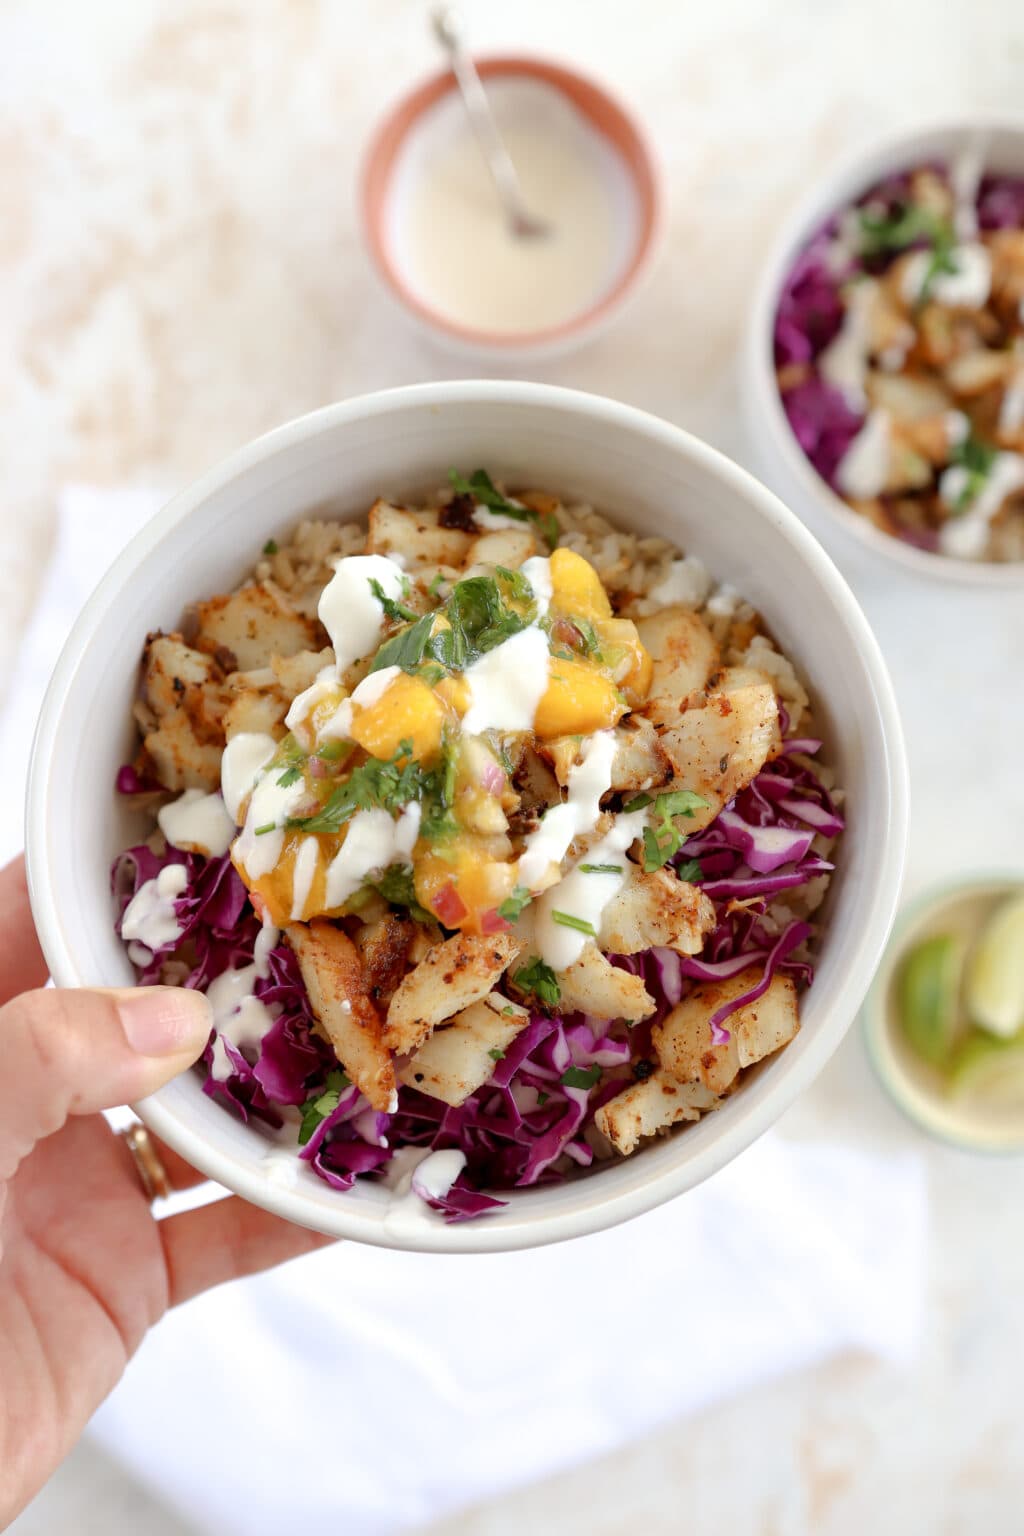 A hand is holding a white bowl. In the background are slices of lime, another taco bowl, and a bowl of lime crema. The main bowl in focus is filled with cabbage, cajun cod, lime crema, brown rice, mango, and cilantro. 